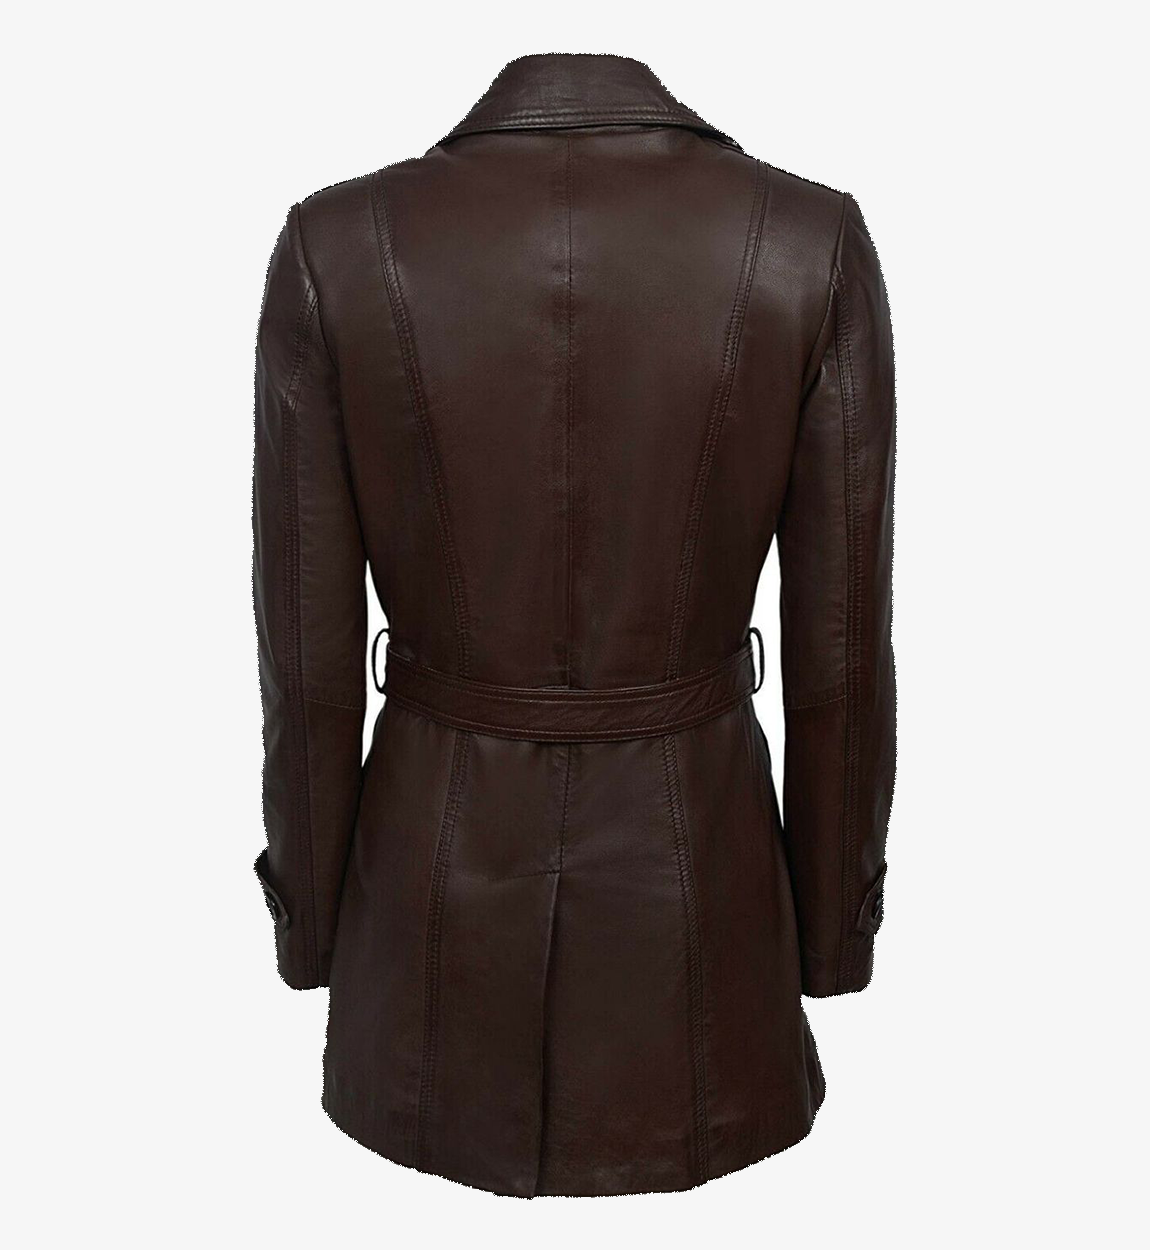 Women's Dark Brown Trench Belted Leather Coat